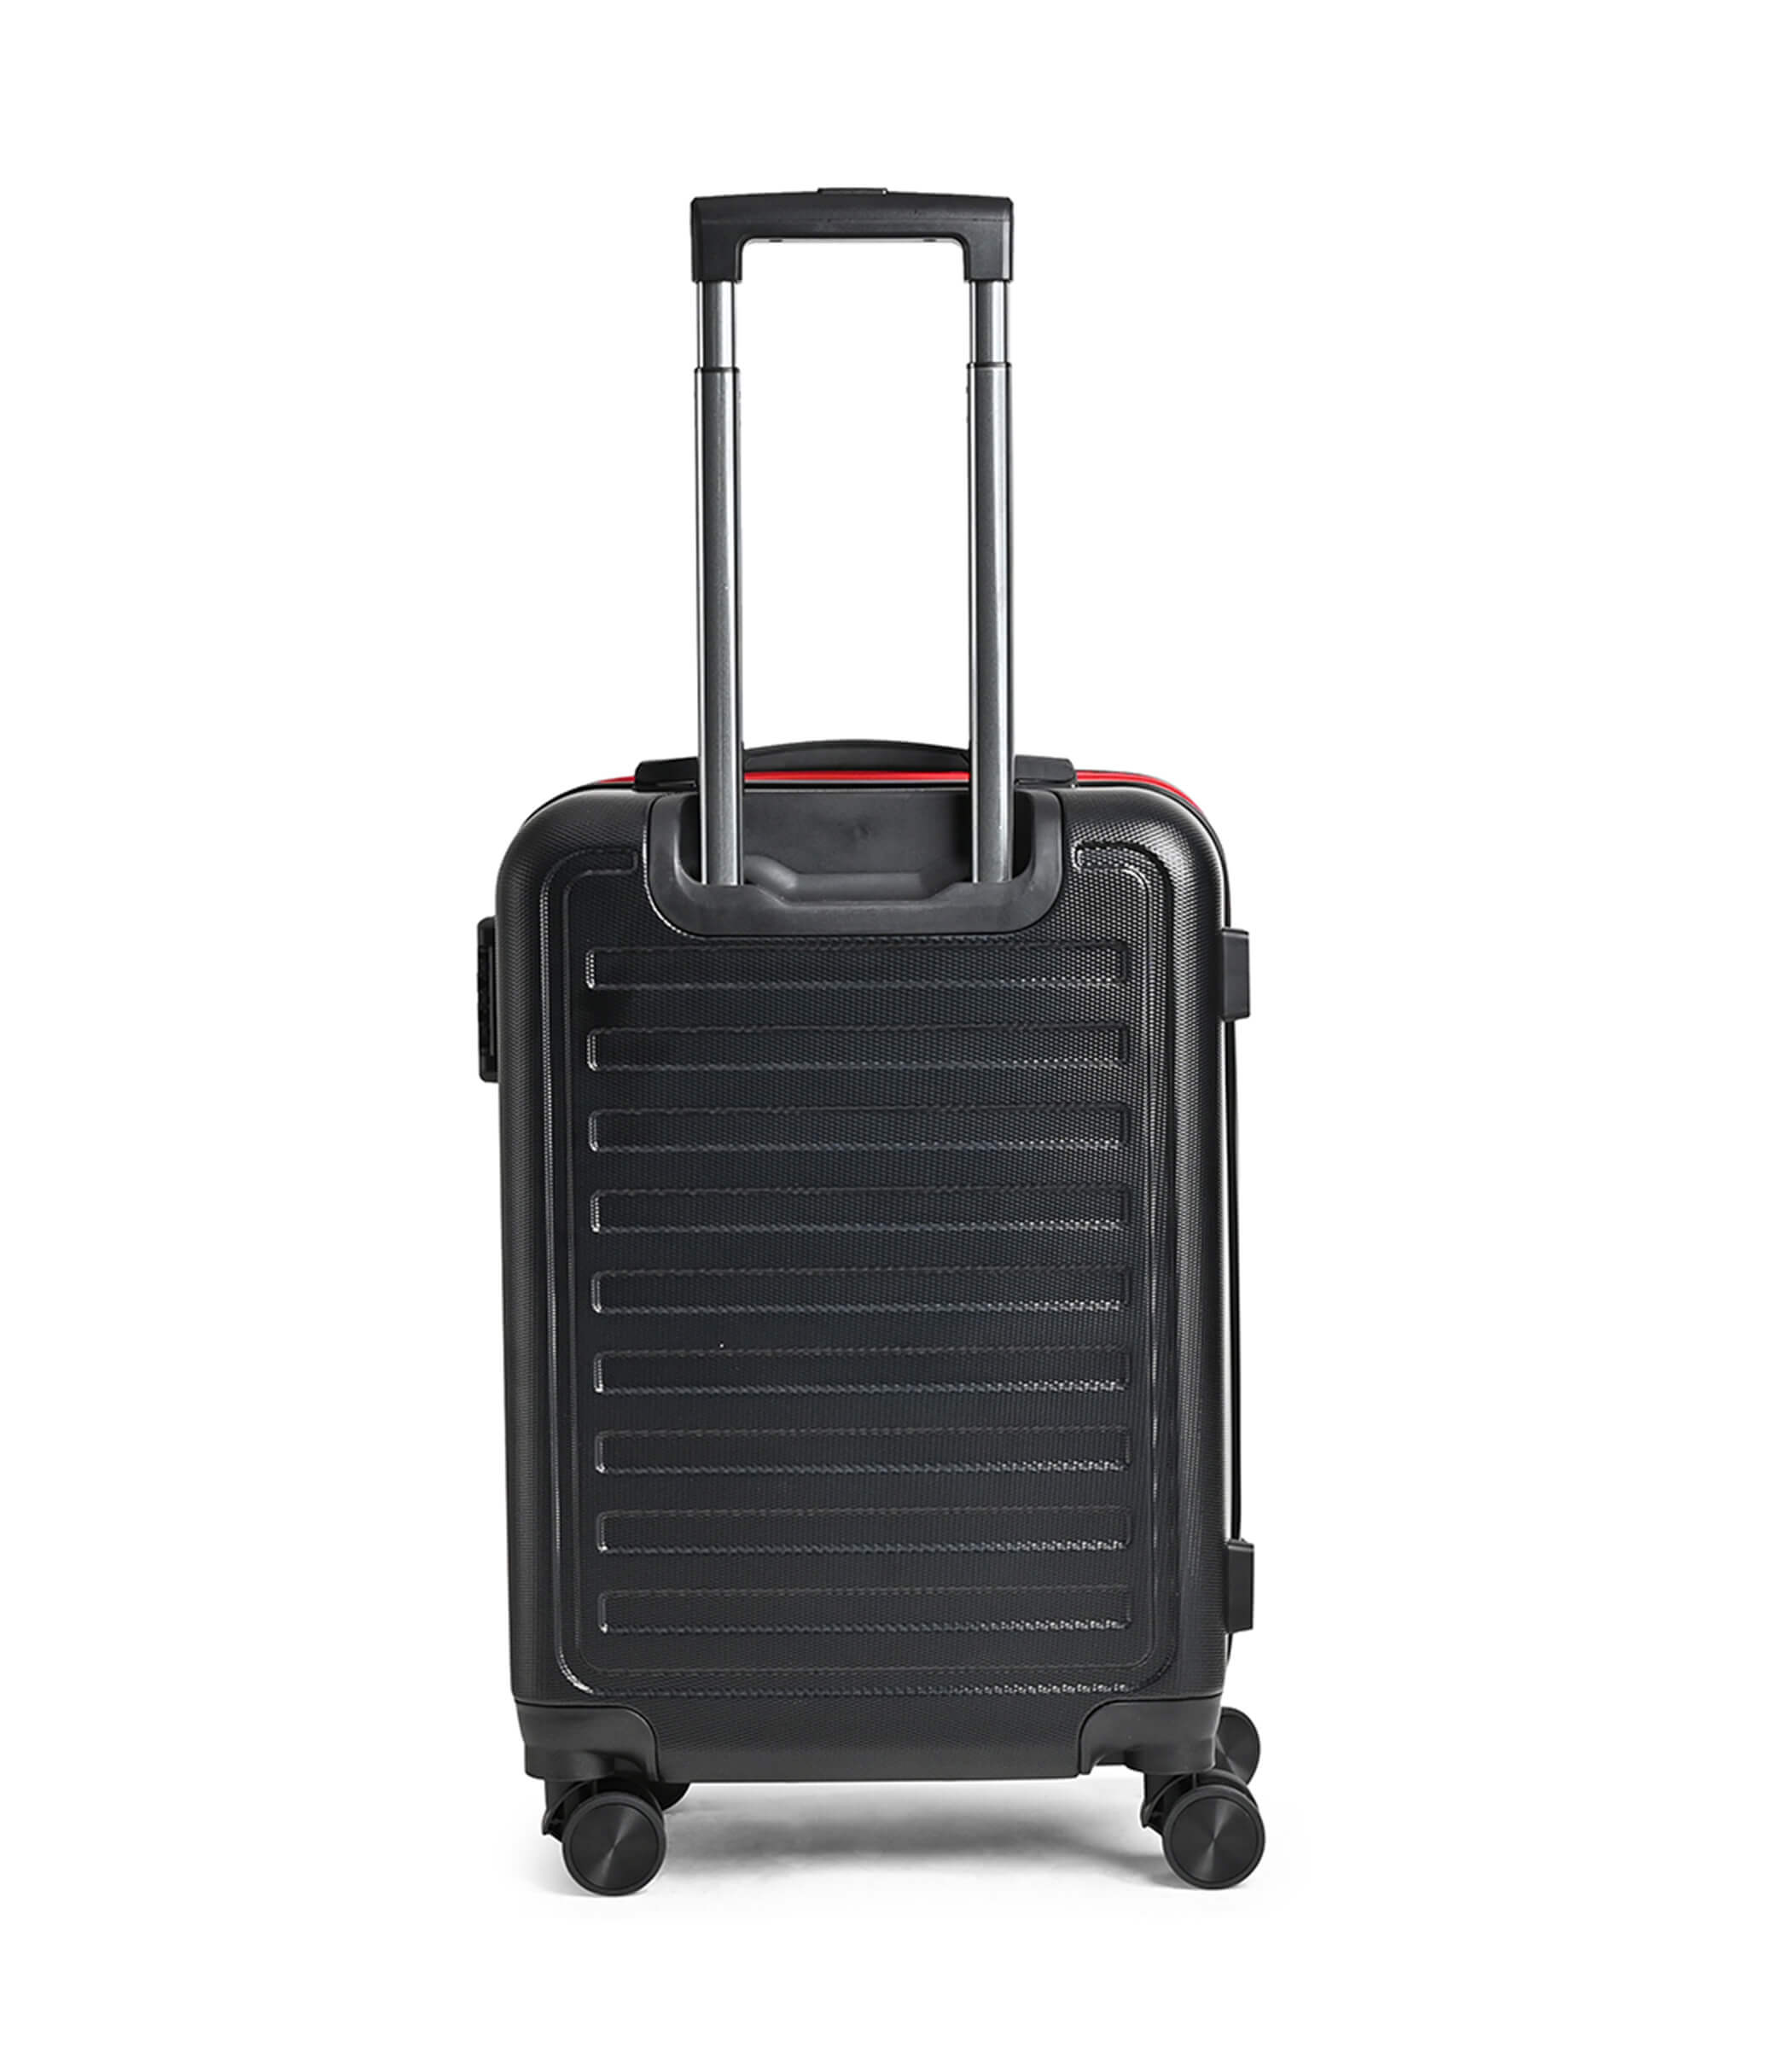 PRIMUS Hard-Sided Laptop-Luggage Trolley Bag - 44 Liters - SWISS